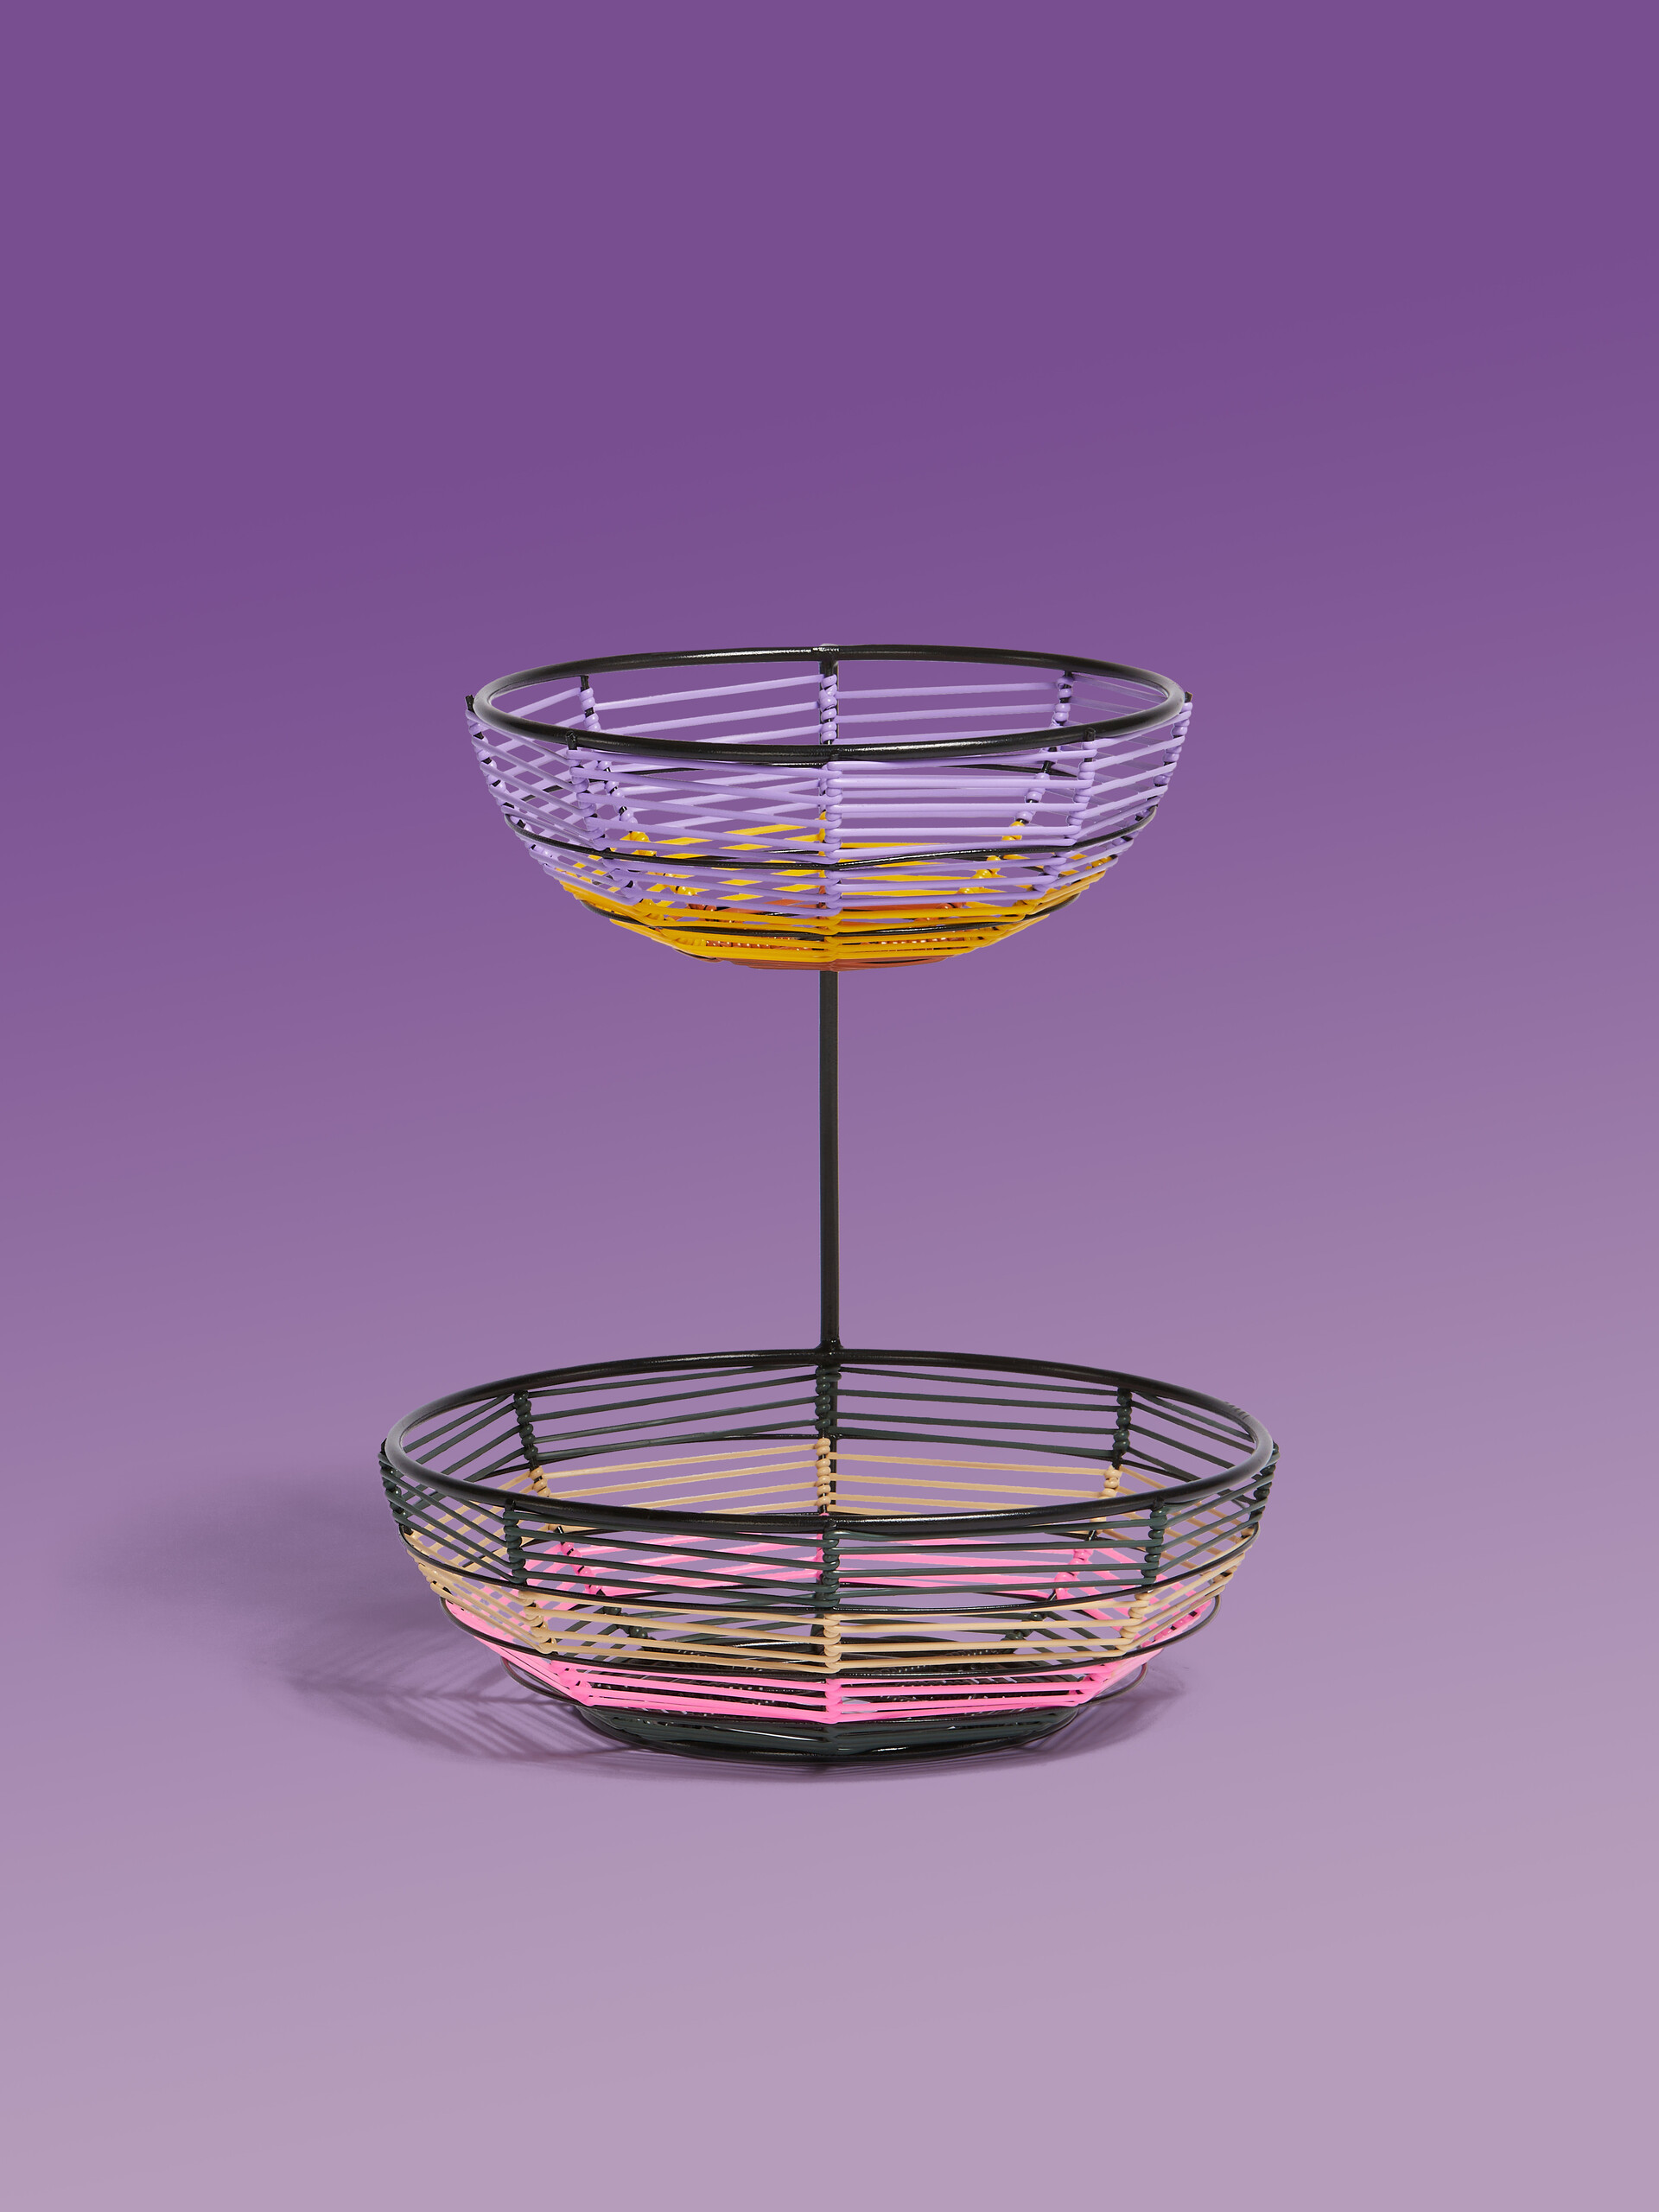 Lilac MARNI MARKET two-tier woven cable fruit stand - Accessories - Image 1